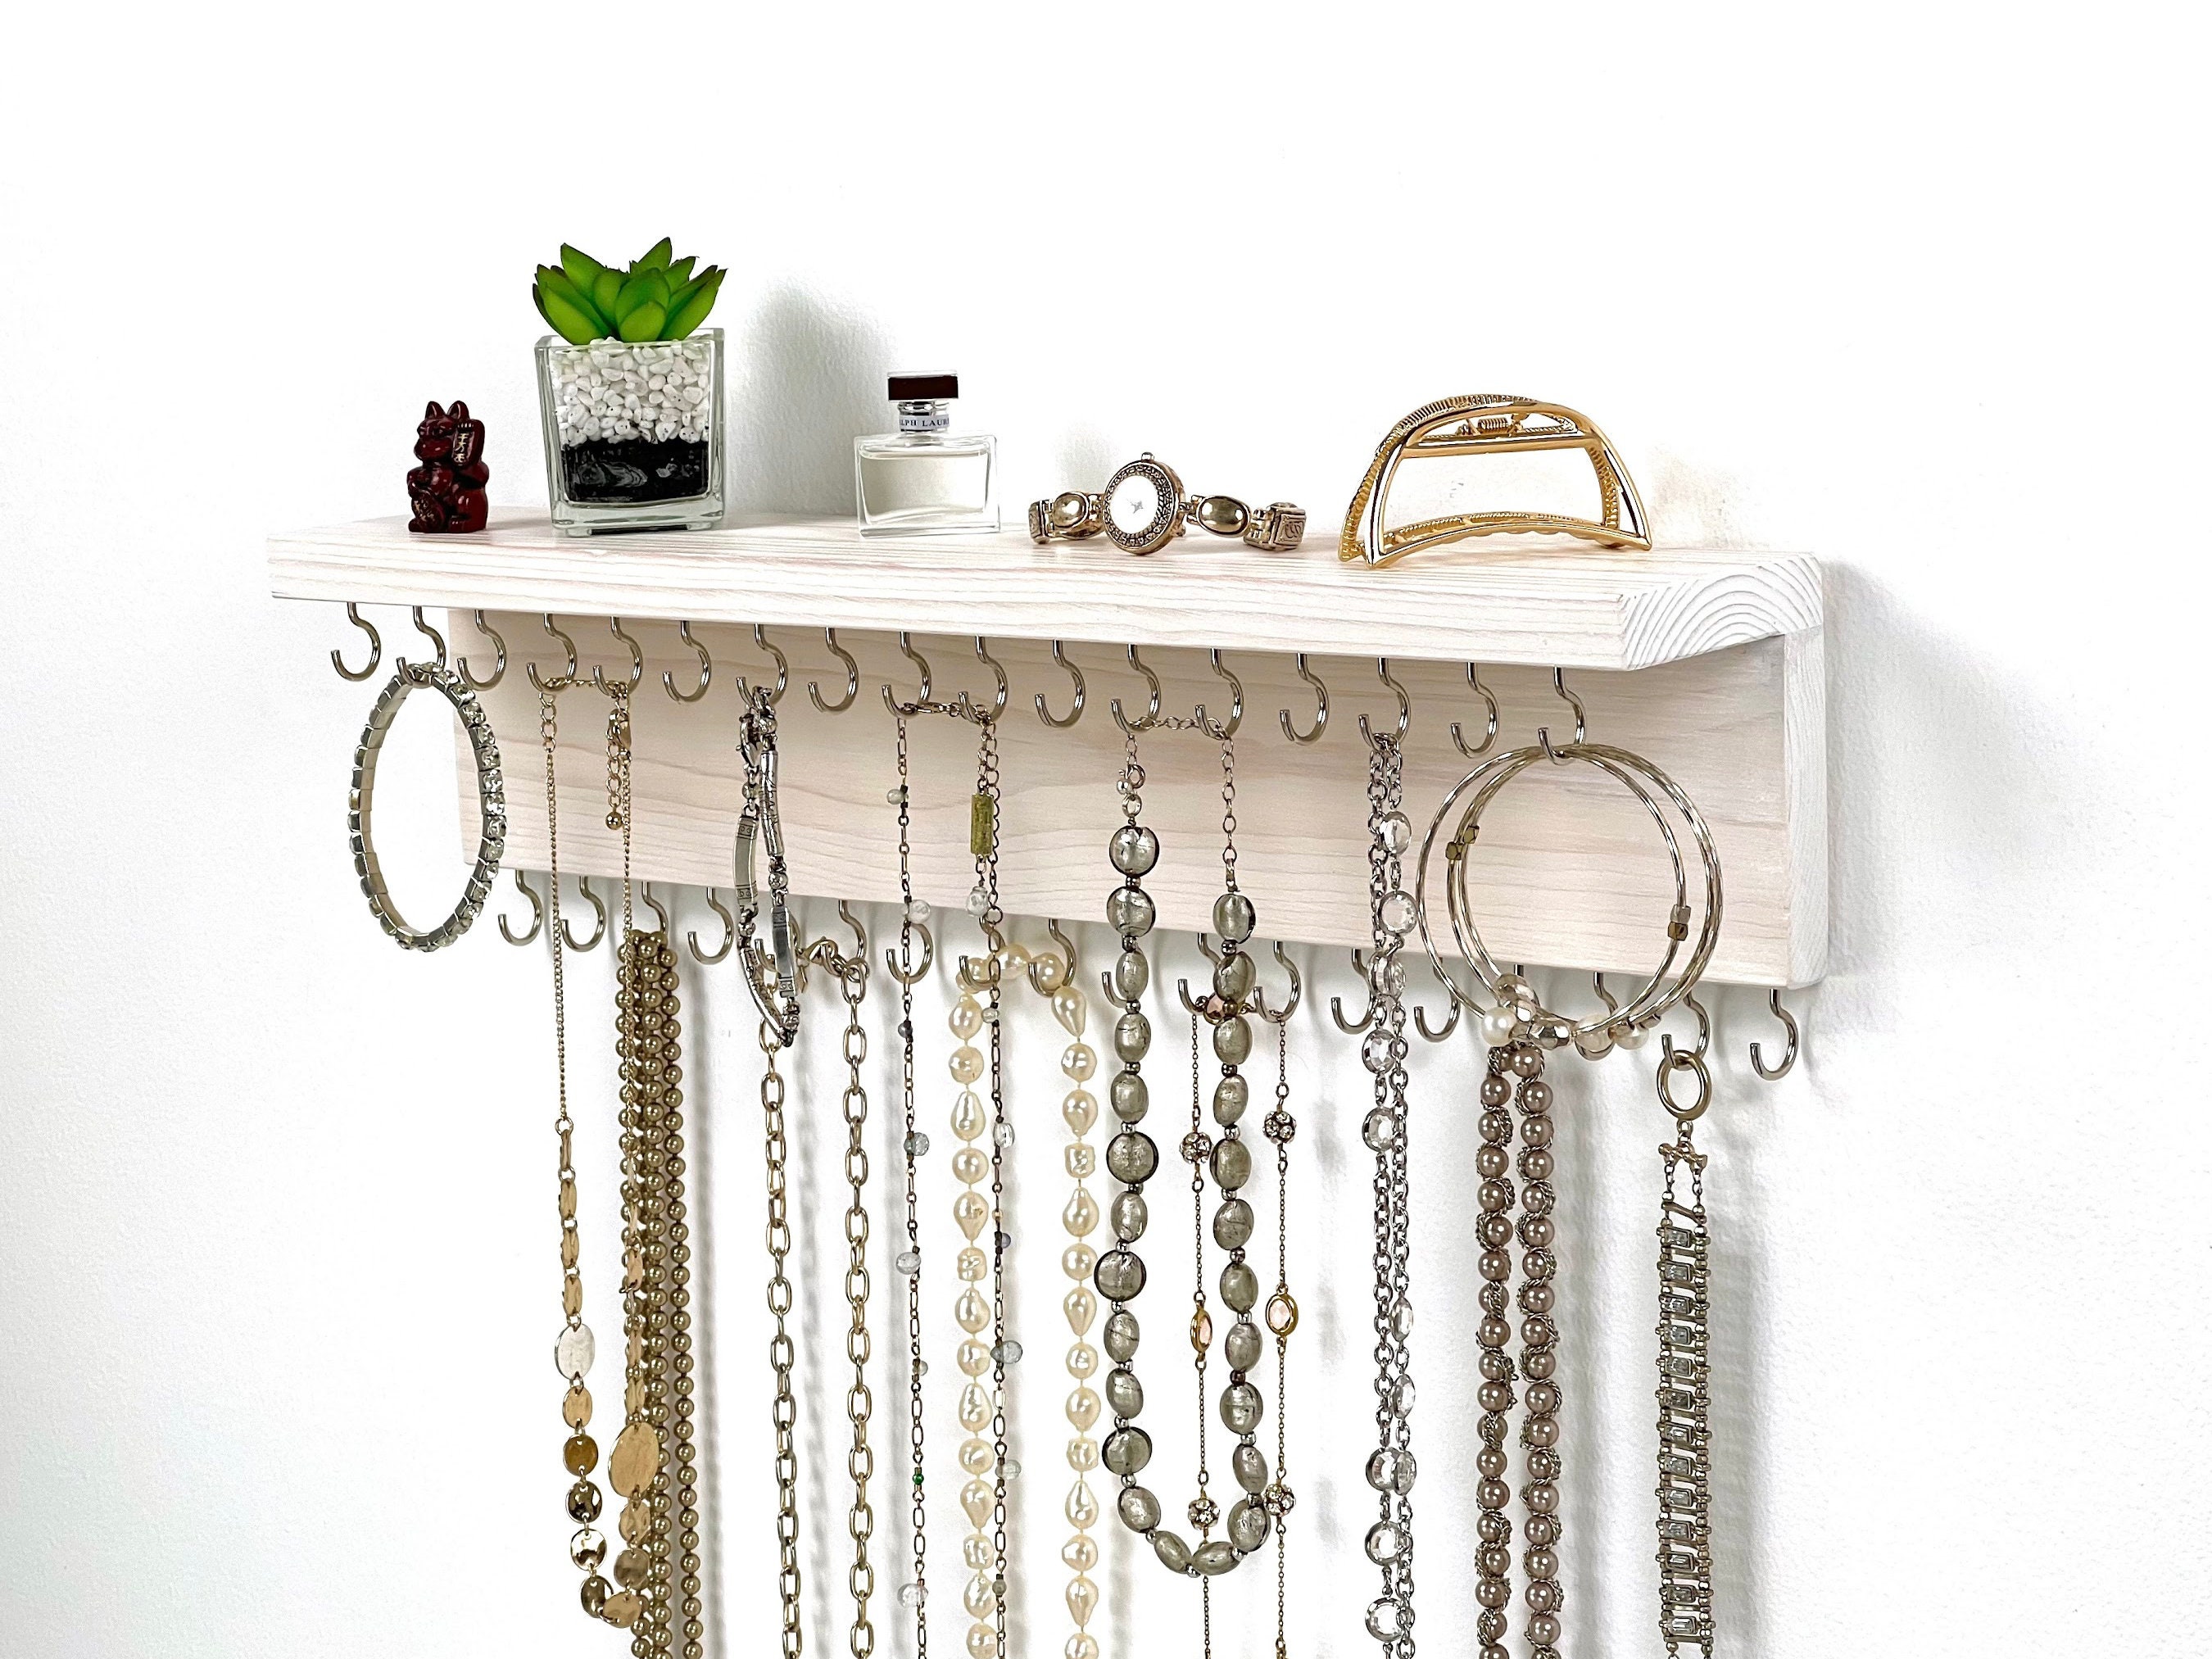 Buy Wall Necklace Holder Jewelry Organizer Online in India - Etsy